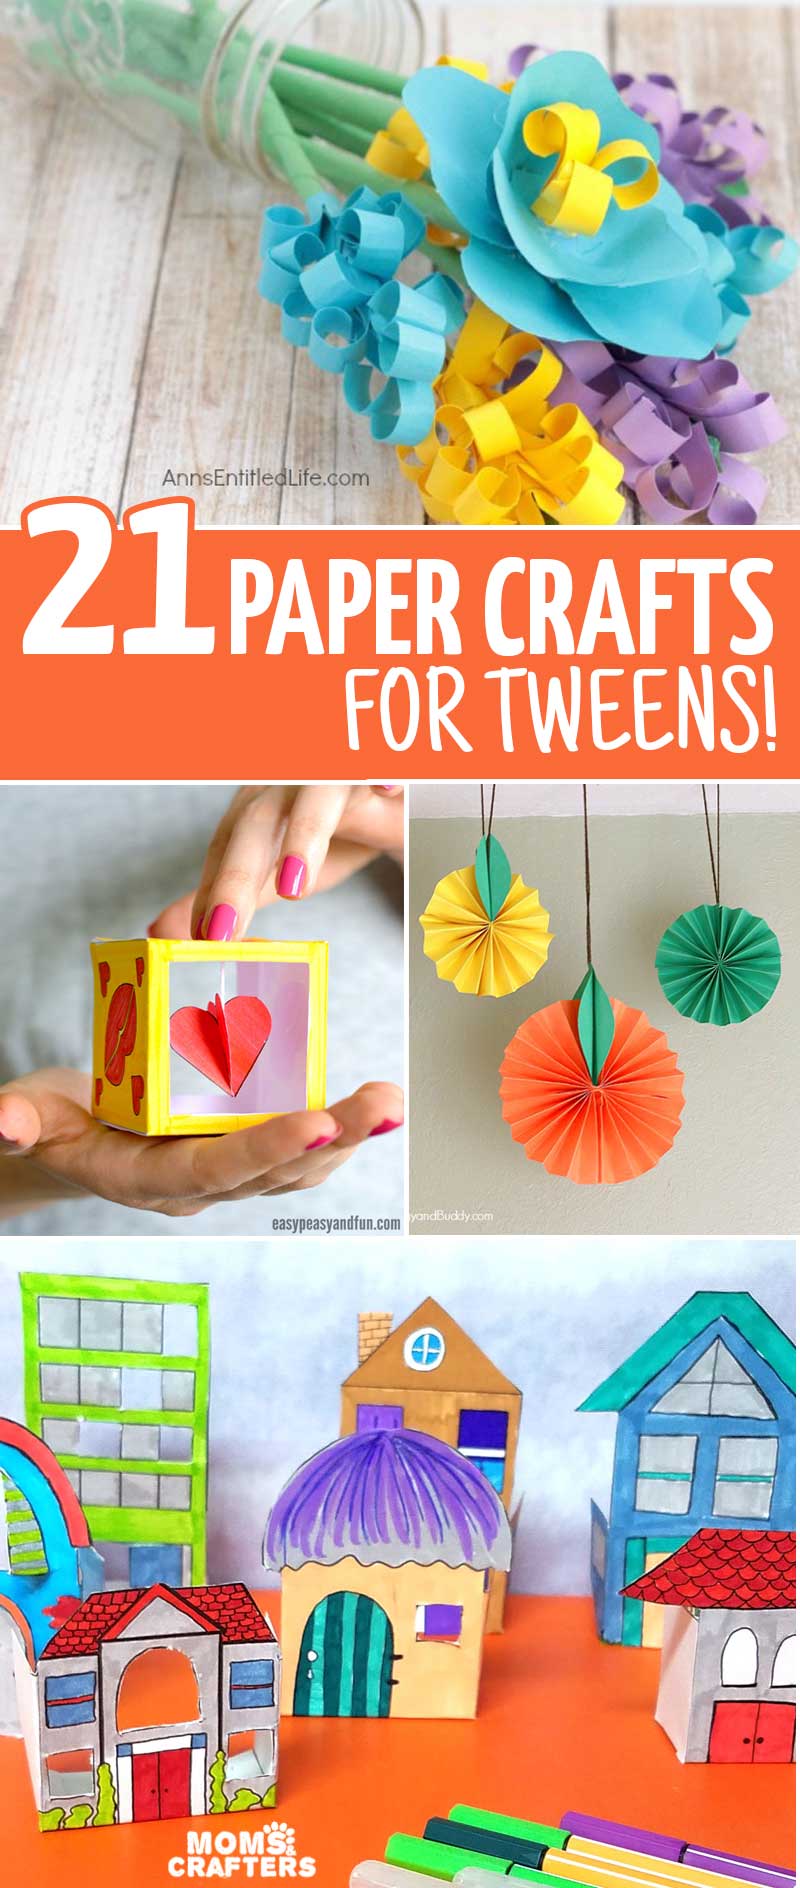 Cool DIY Crafts and Projects for Teen Girls - The Activity Mom